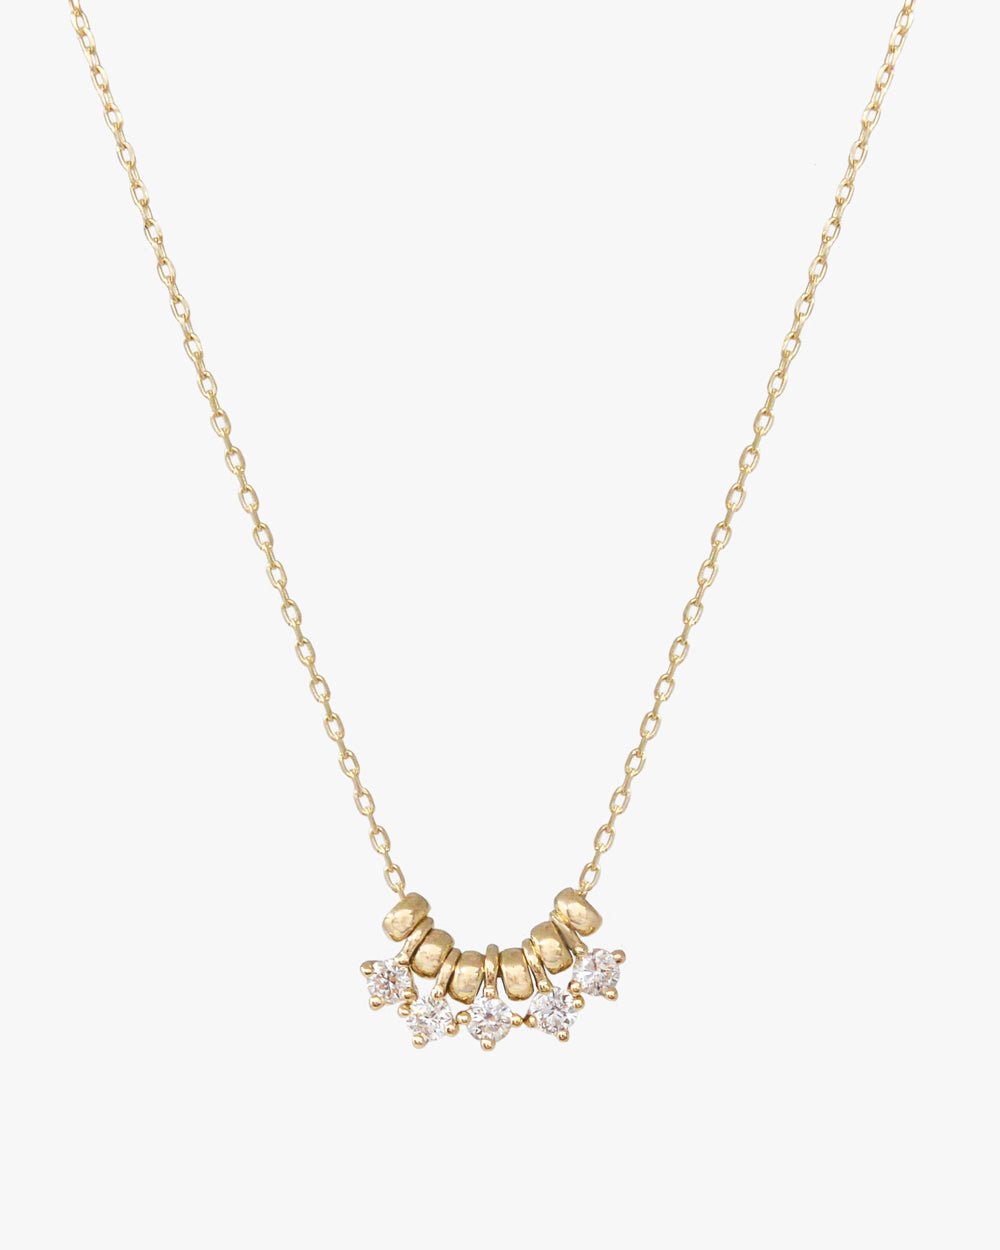 STAFFORD ROLLING DIAMOND NECKLACE - Shop Cupcakes and Cashmere